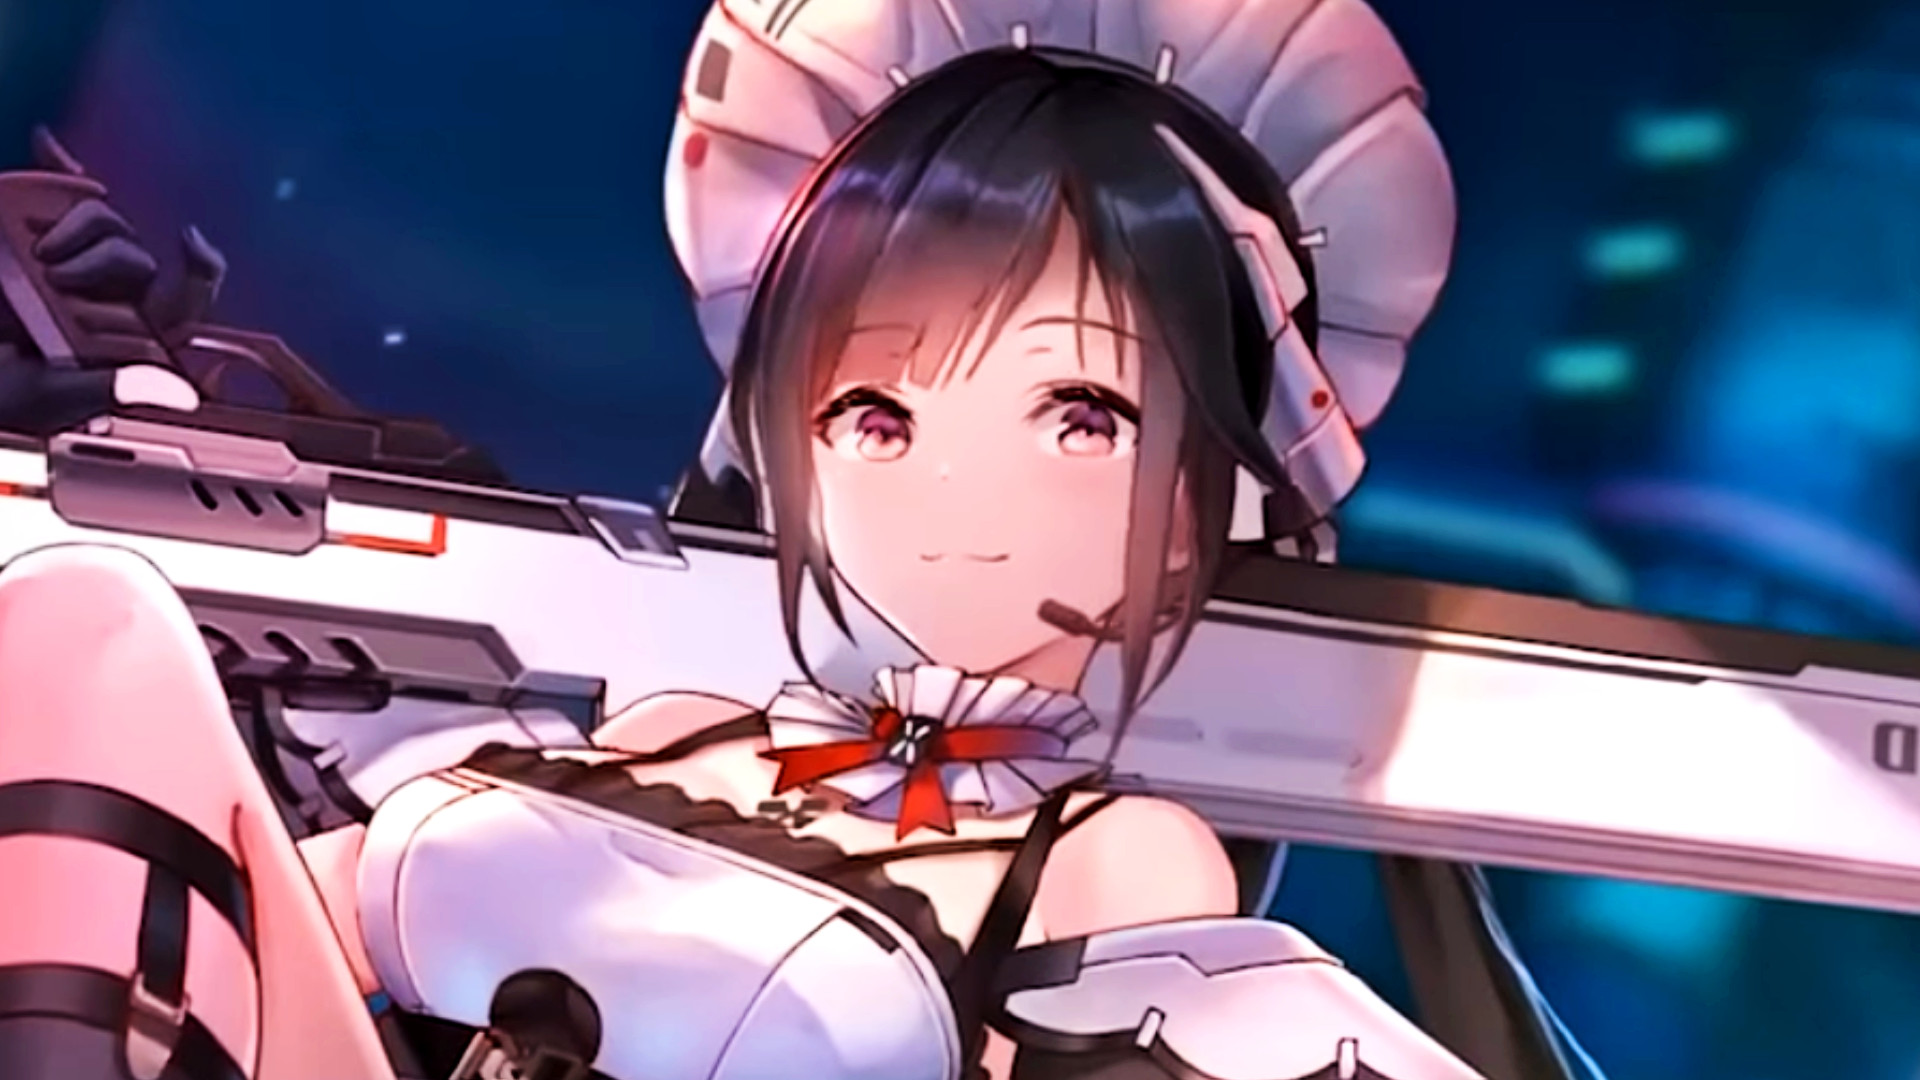 Tower of Fantasy Reveals Battle Maid Annabella's Gameplay in New Trailer